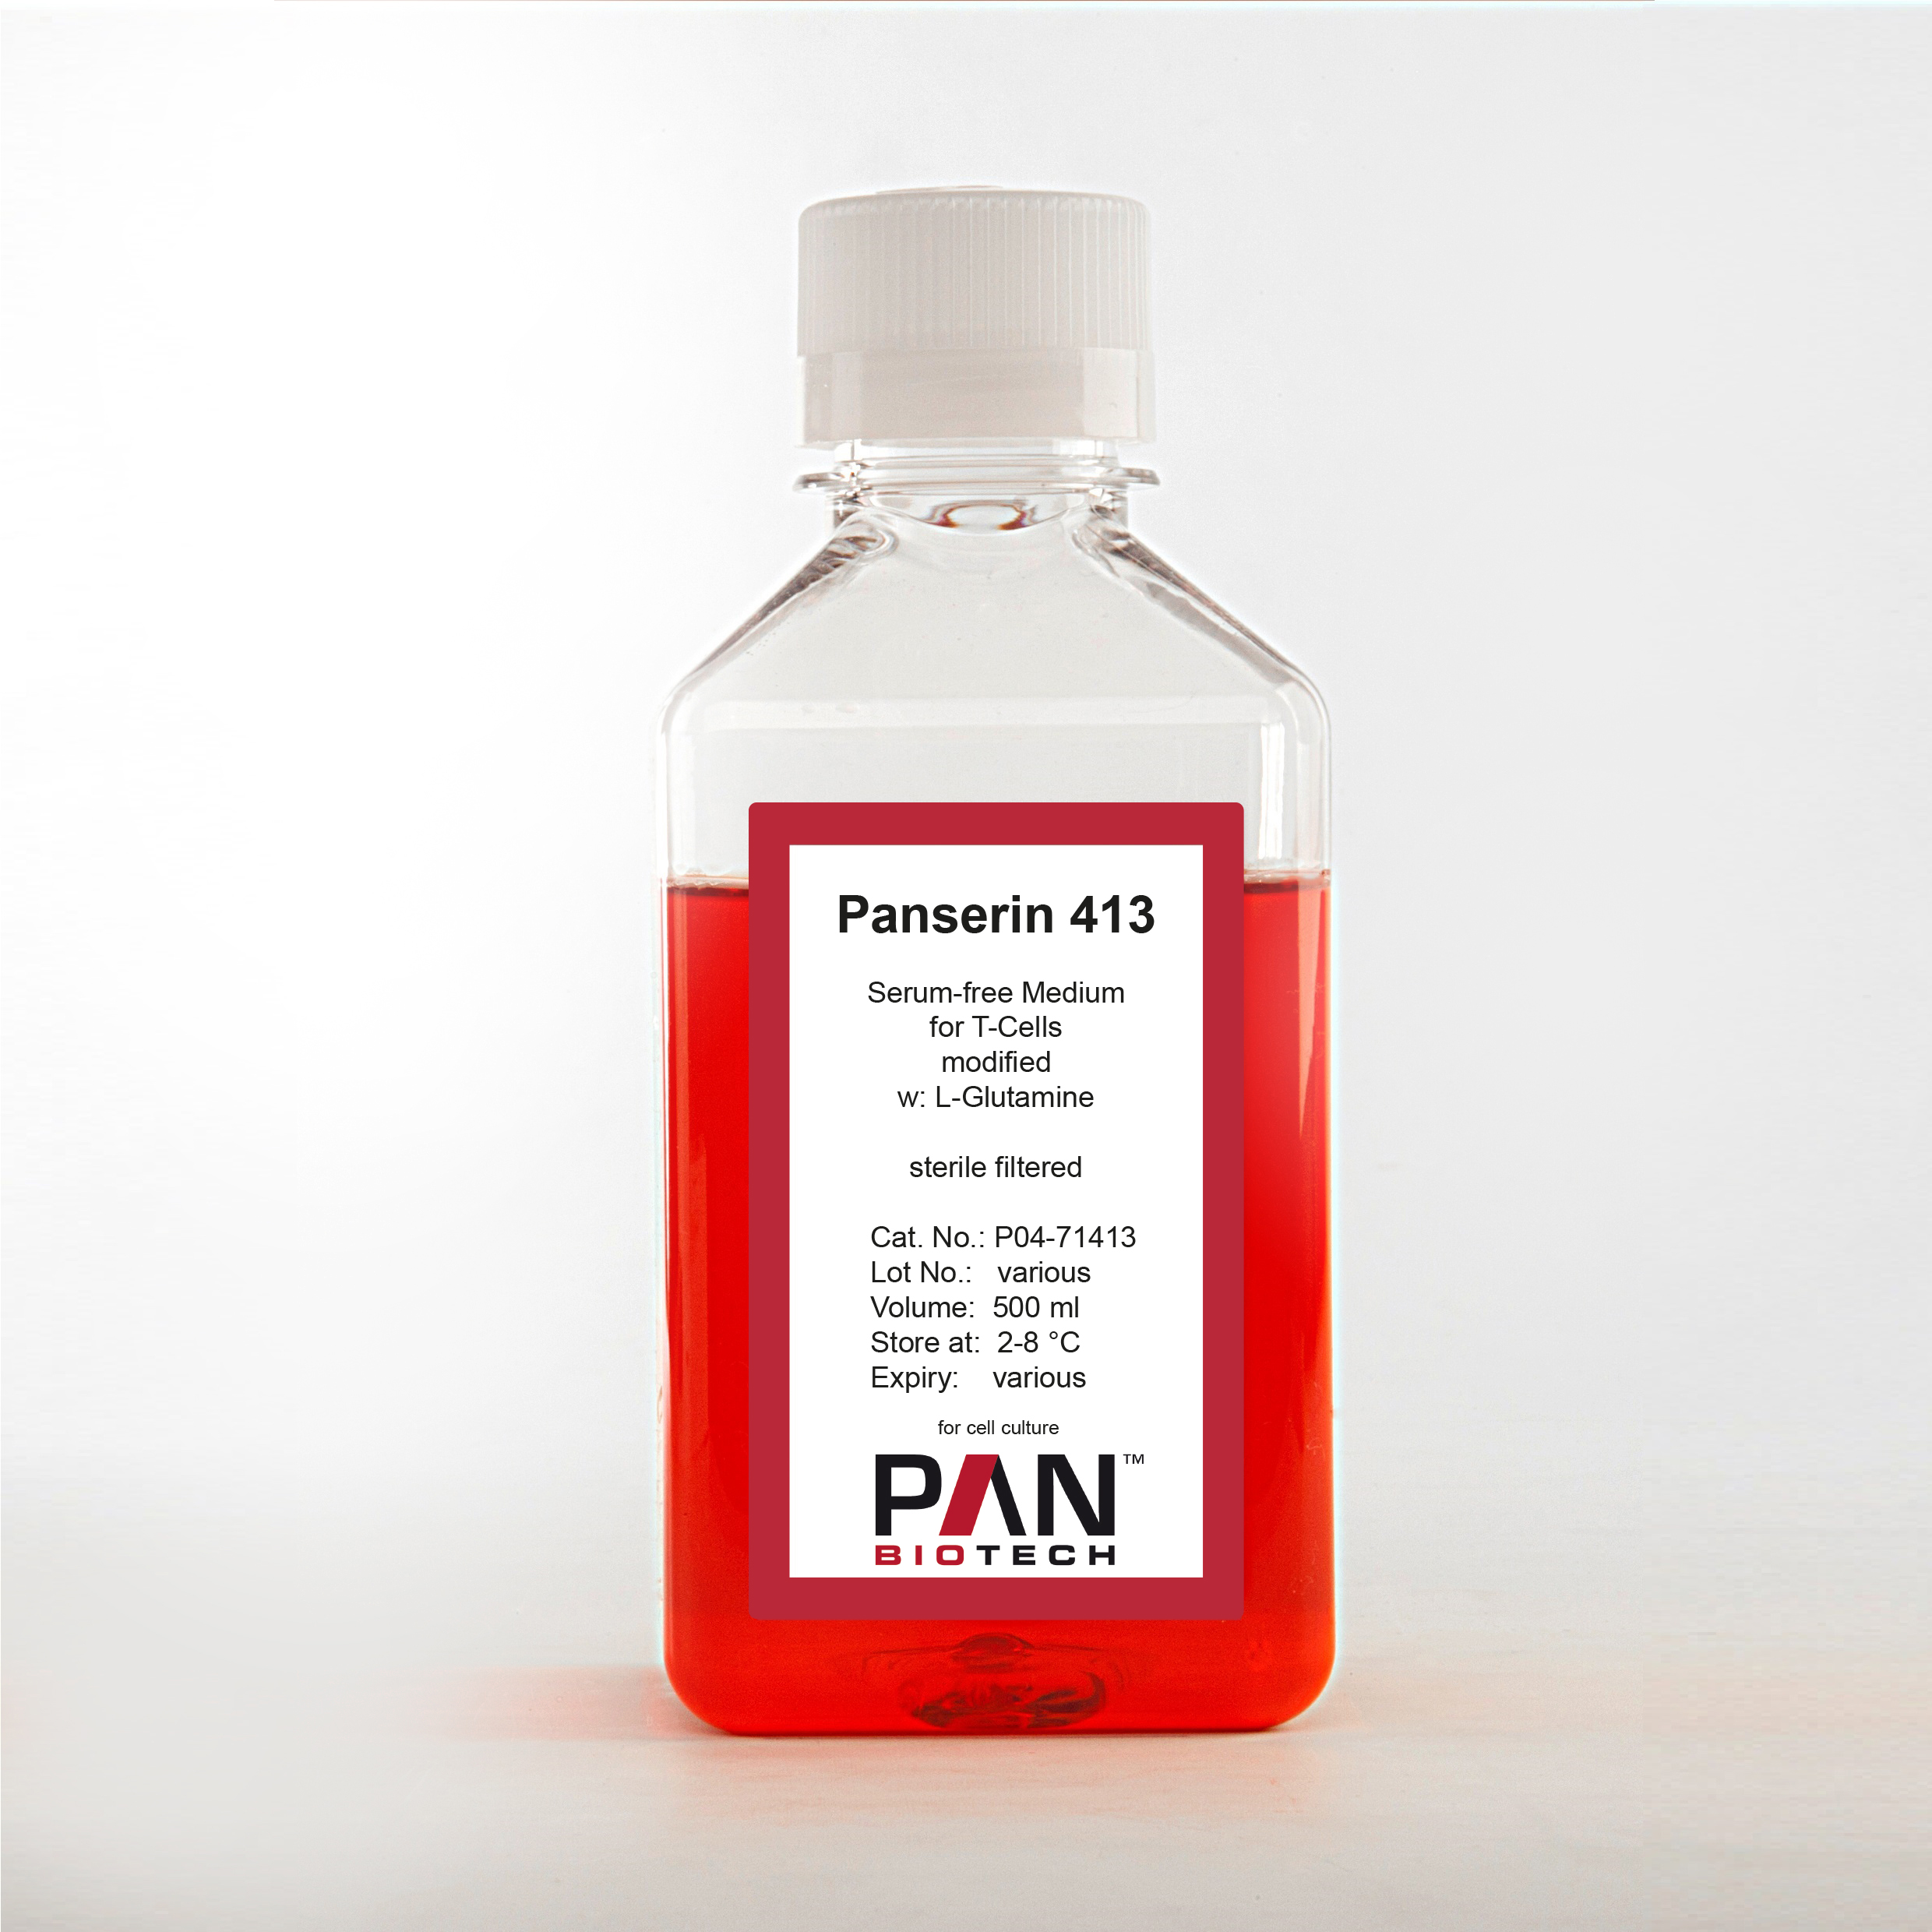 Panserin 413, Serum-free Medium for Lymphocytes, T-Cells and Hybridoma Cells, w: L-Glutamine, modified